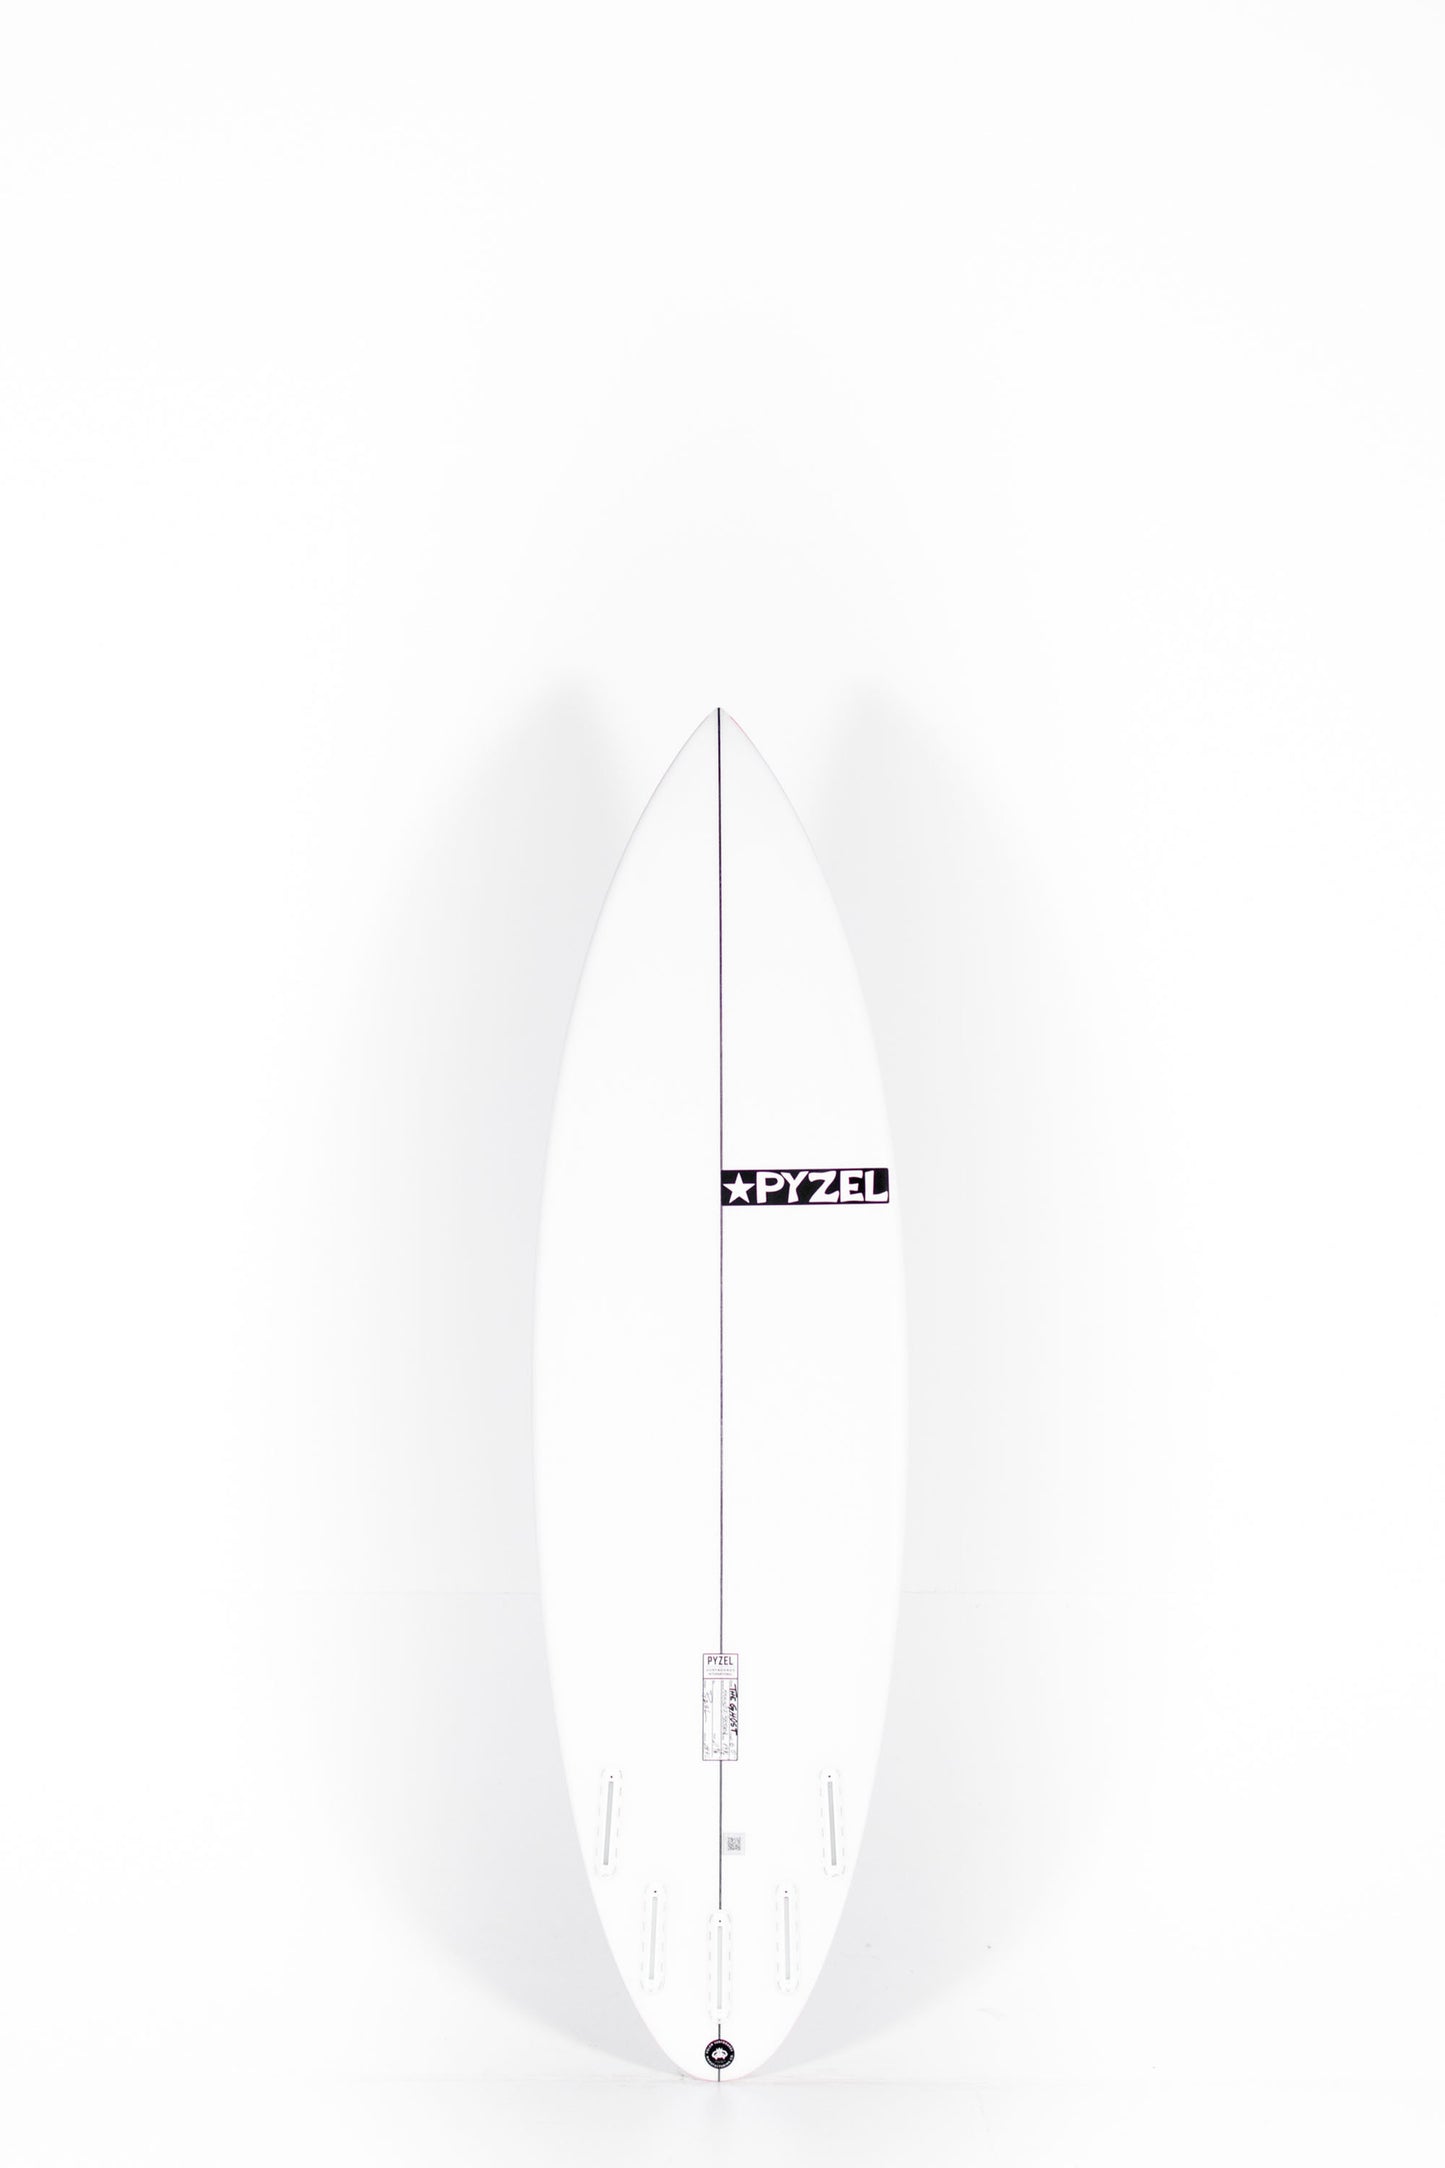 Pyzel Surfboards - GHOST - 6'0